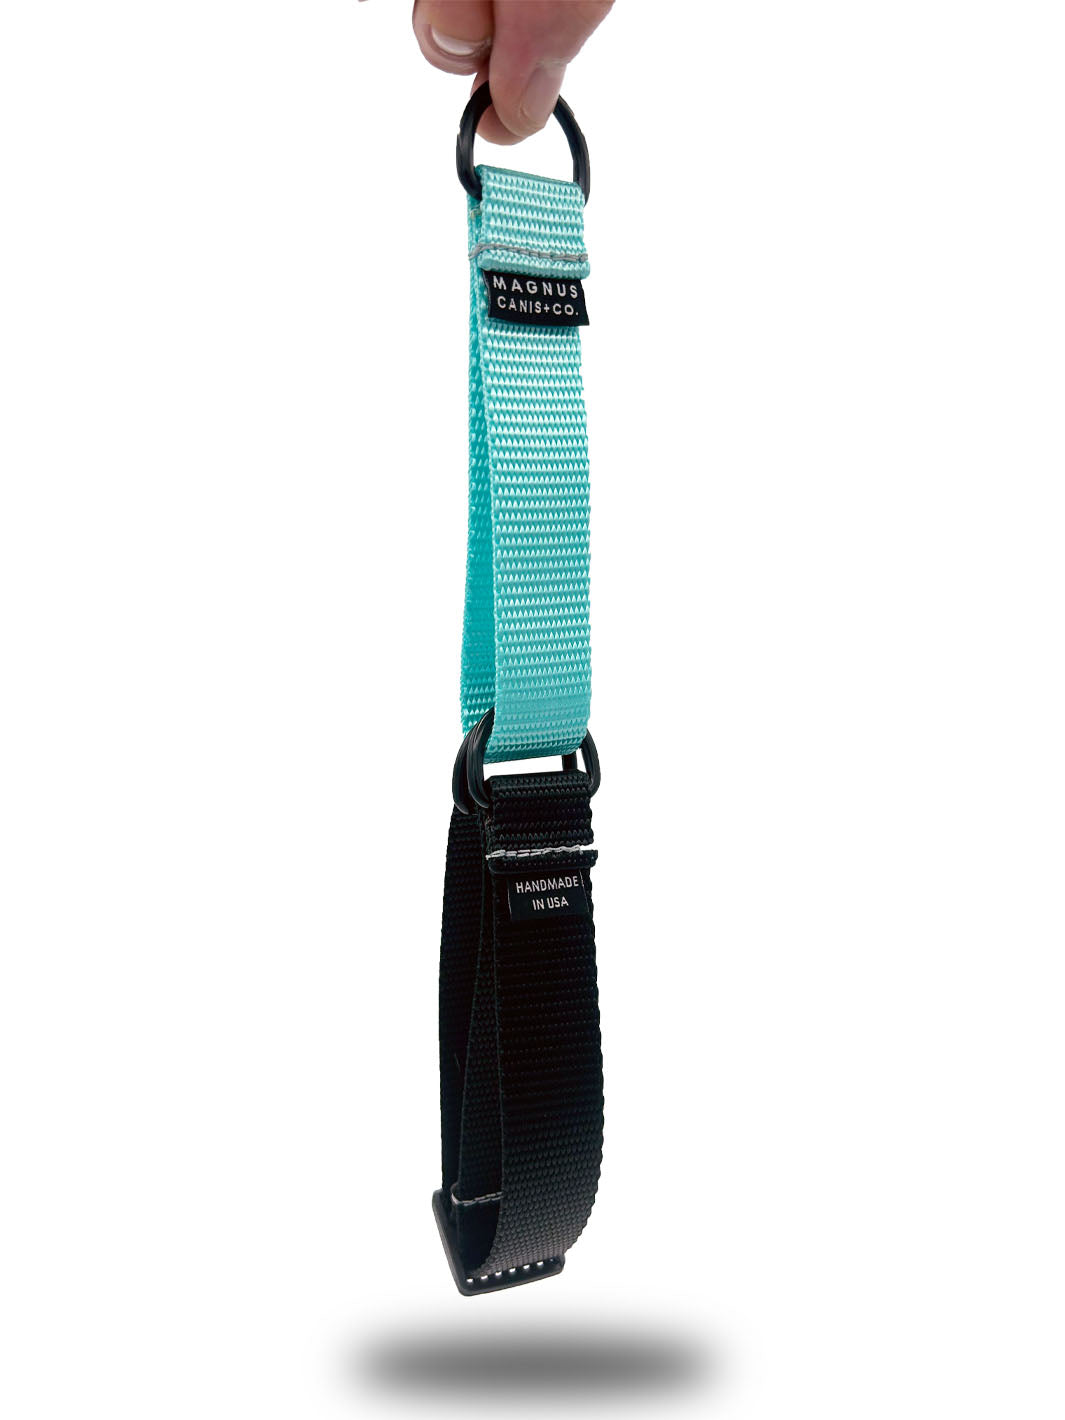 Black and light blue nylon martingale dog collar by MAGNUS Canis.